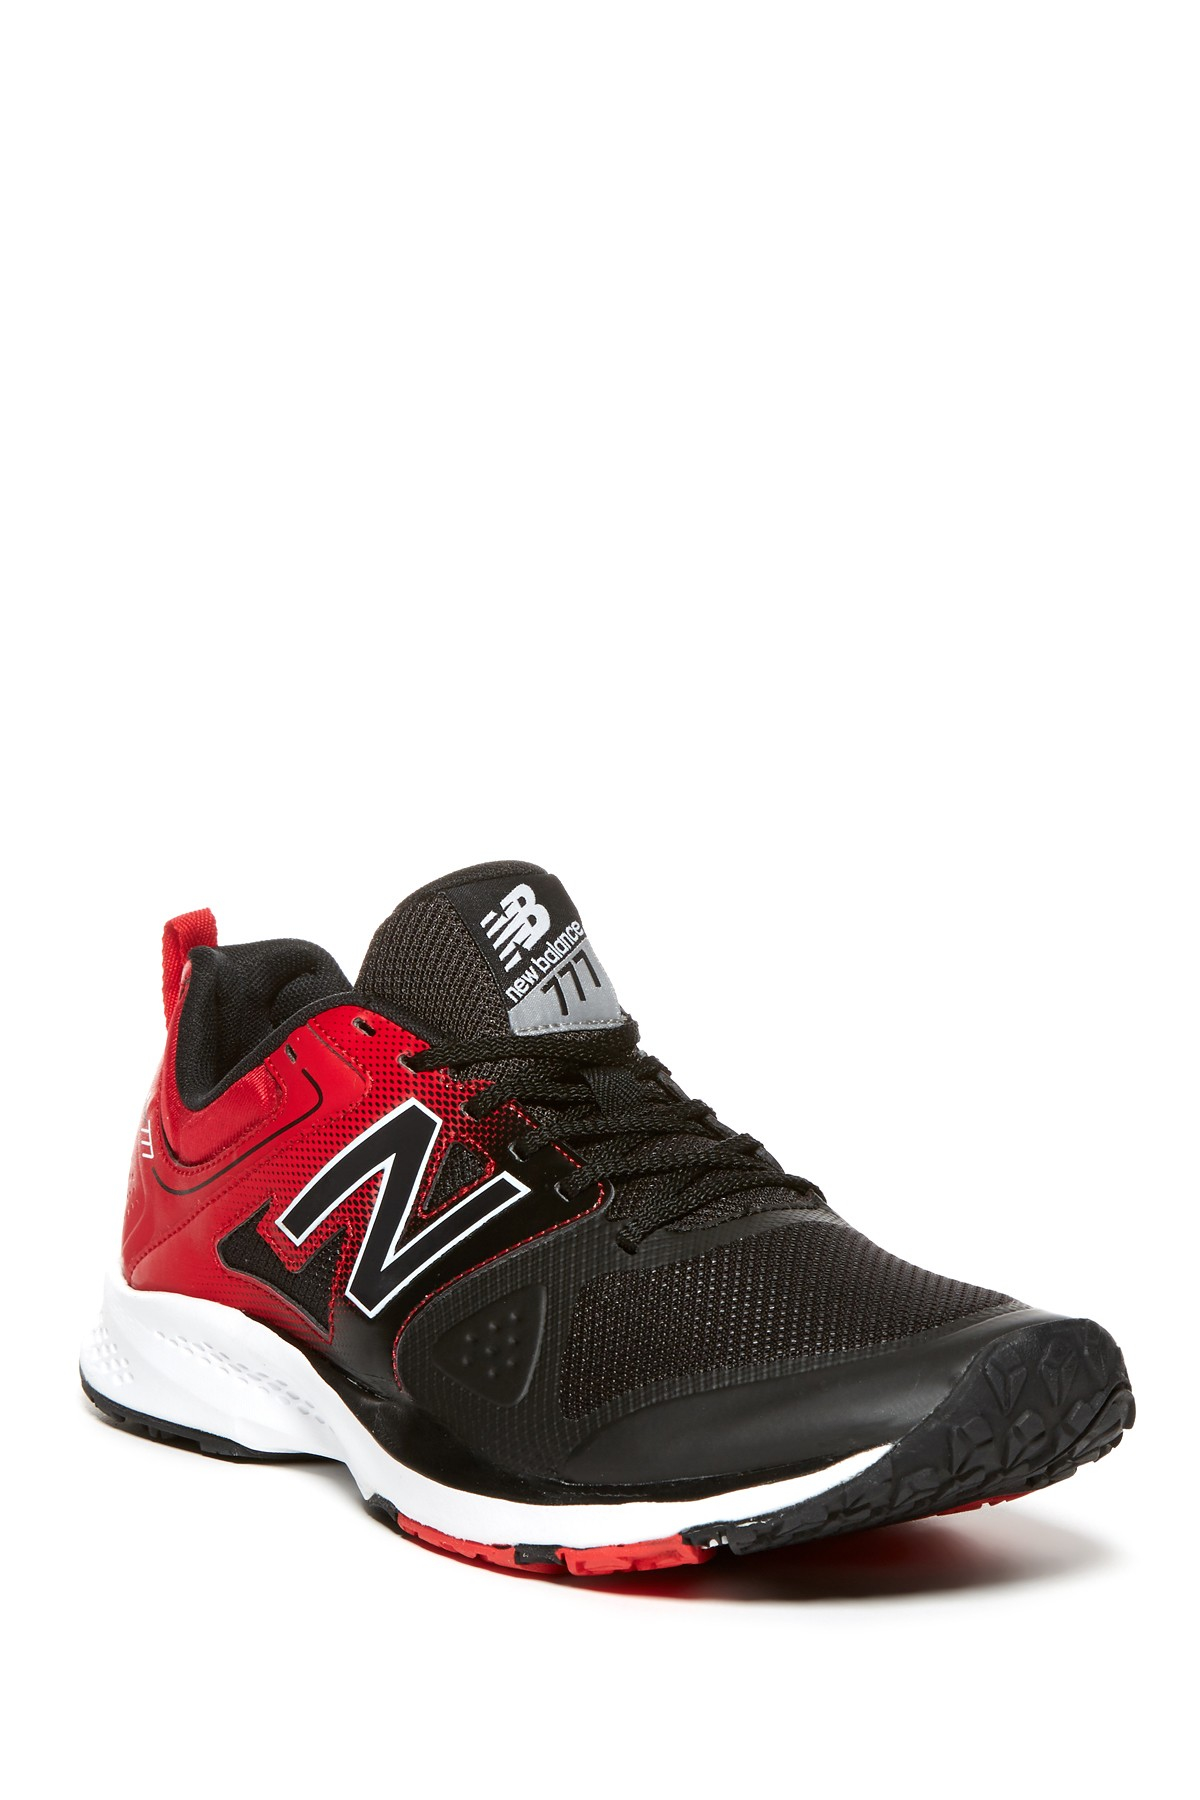 New Balance 777 V2 Training Shoe - Wide Width Available in Black ...